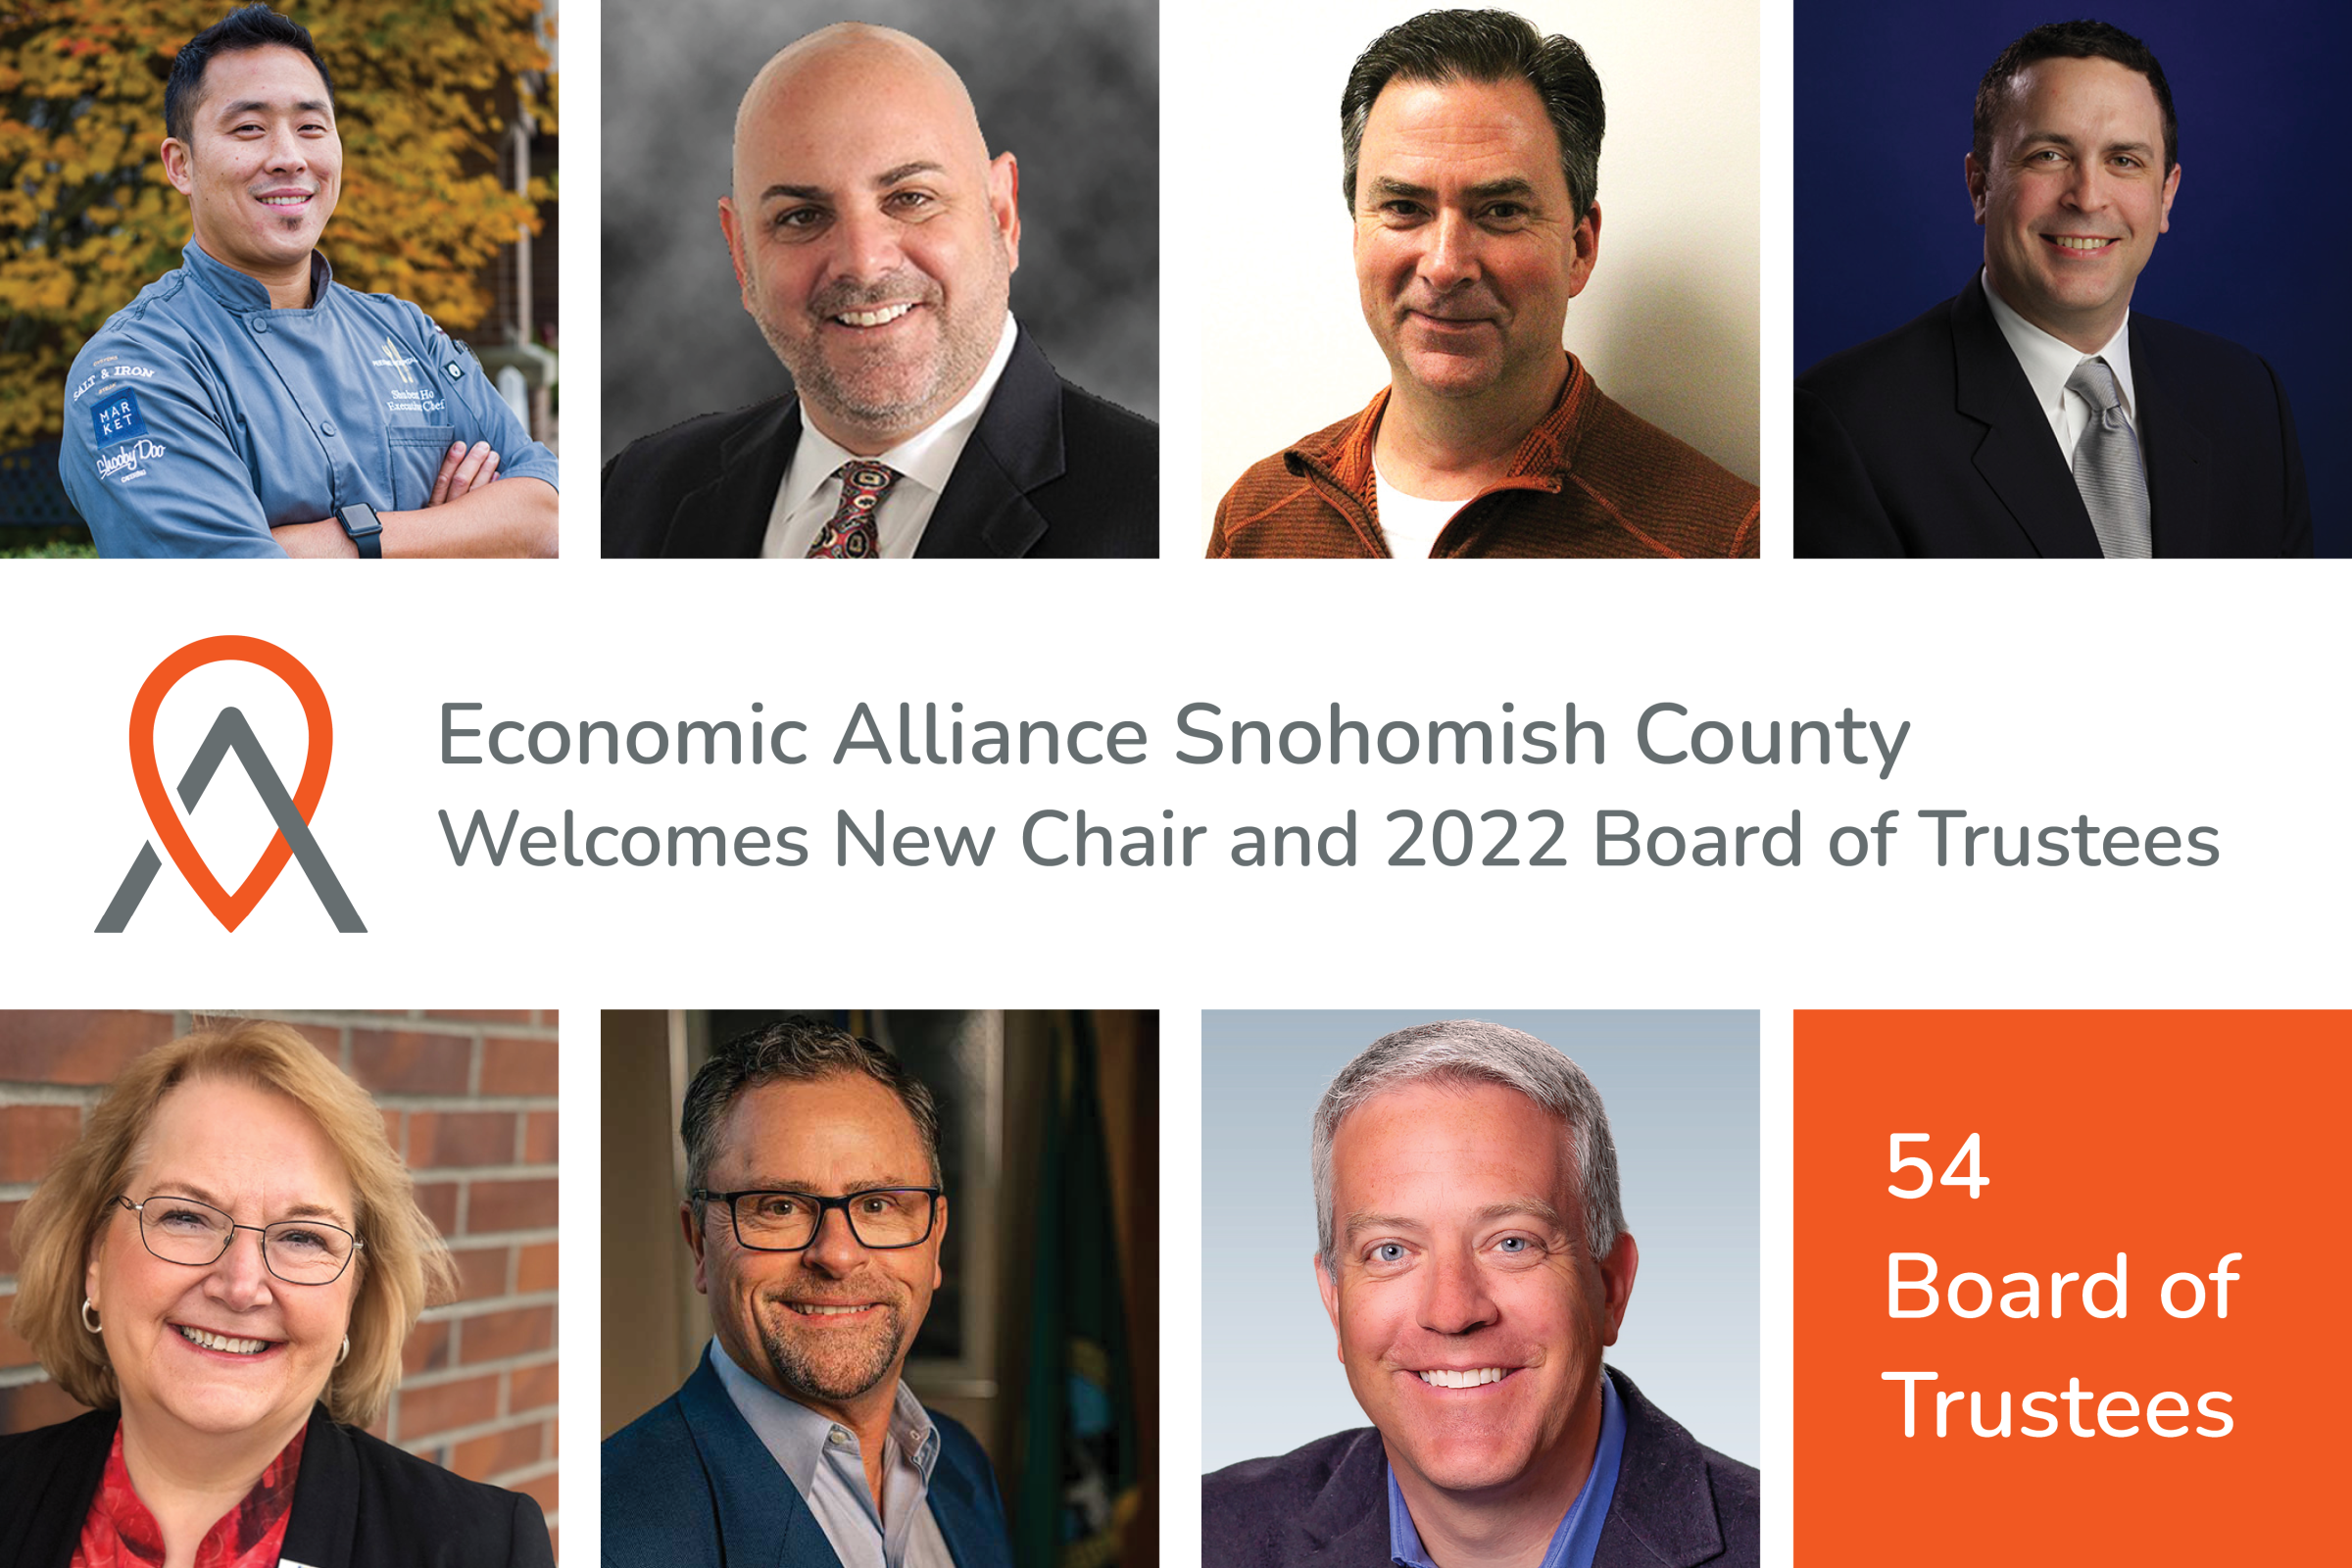 Economic Alliance Snohomish County (EASC) Welcomes New Chair and 2022 Board of Trustees Photo